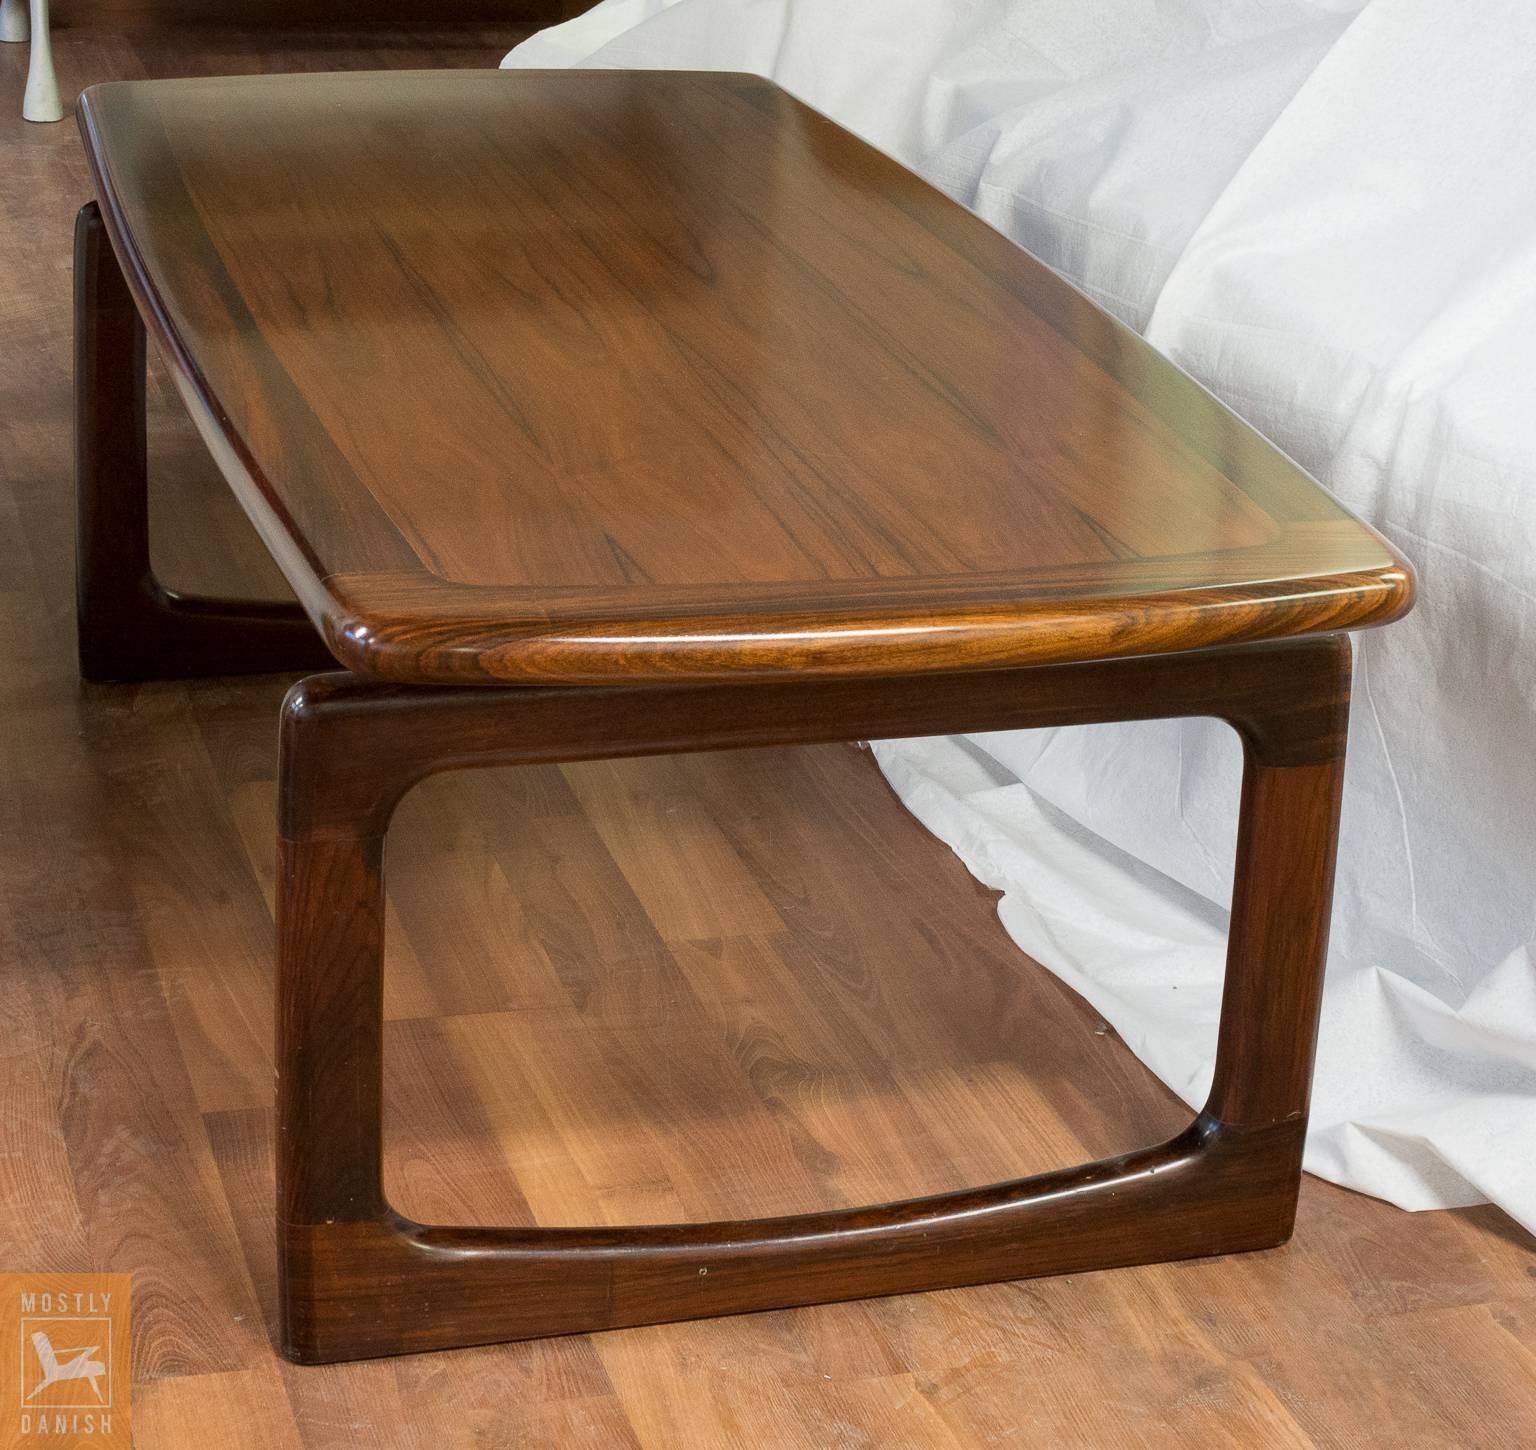 Exquisite Rosewood Coffee Table by Dyrlund In Excellent Condition For Sale In Ottawa, ON